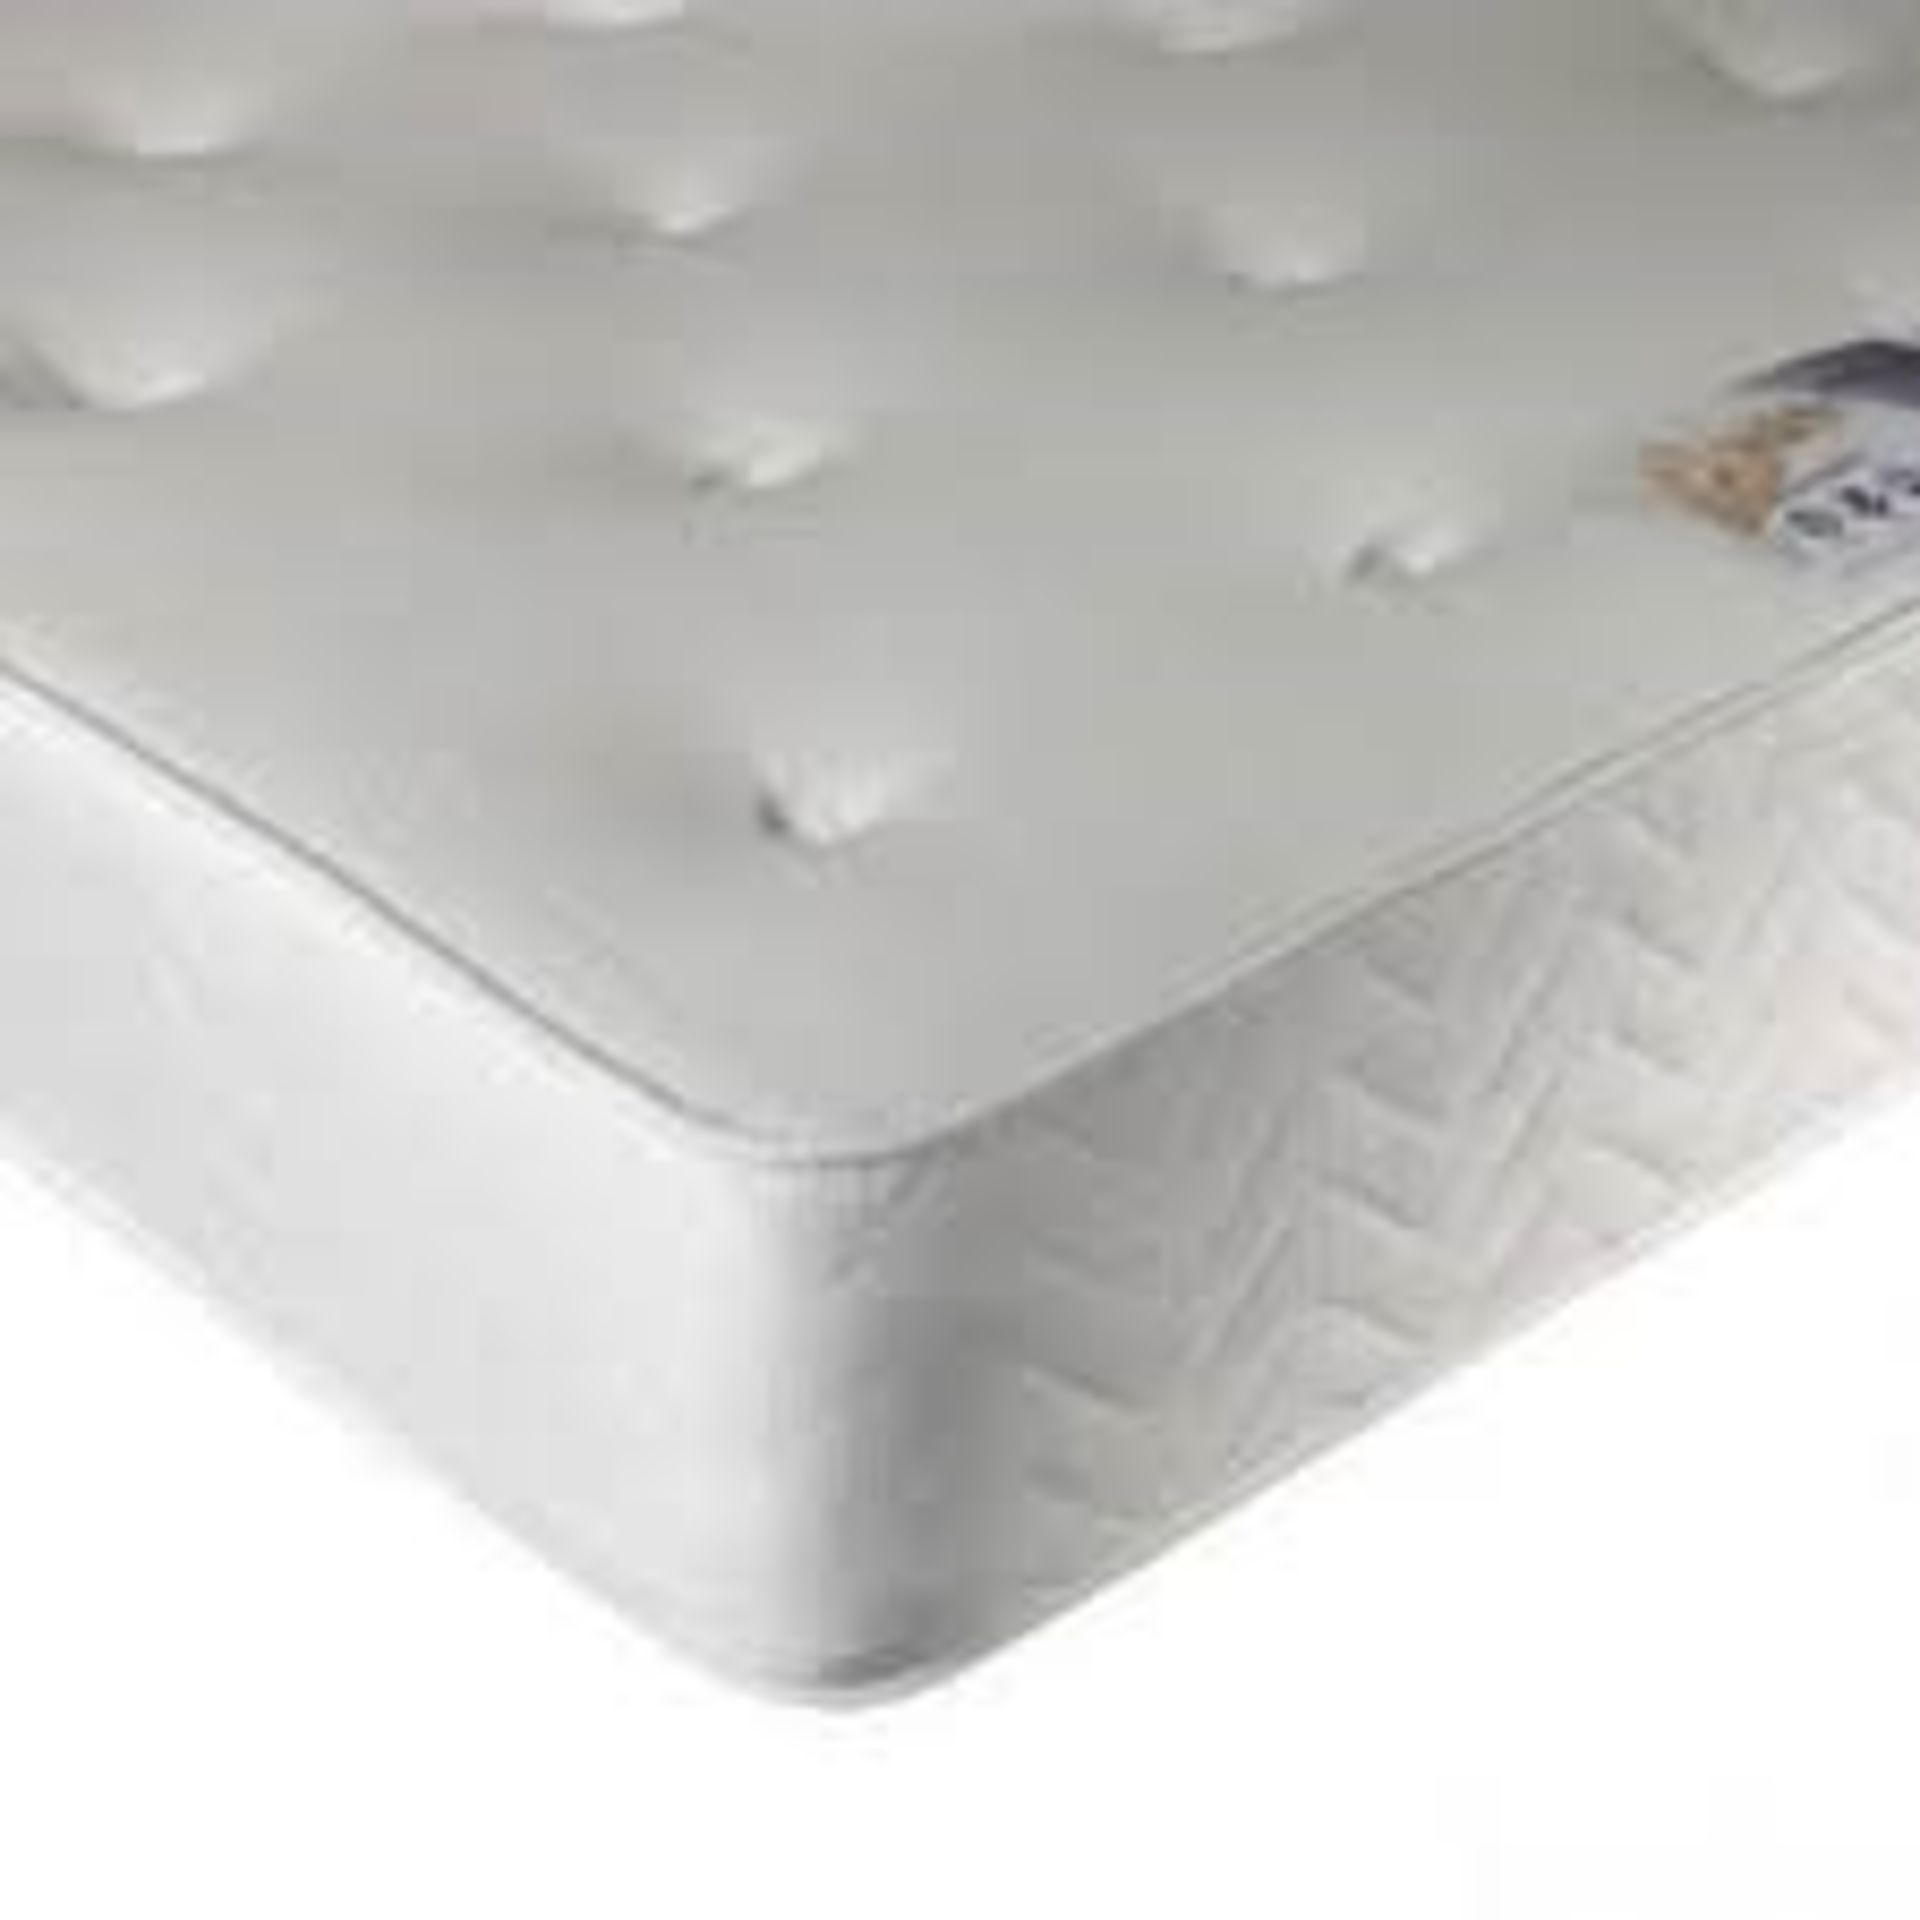 1 GRADE A BAGGED GILTEDGE SENSATIONS 1500 MATTRESS / KING - 5FT / PICTURE IS JUST FOR GUIDELINE (